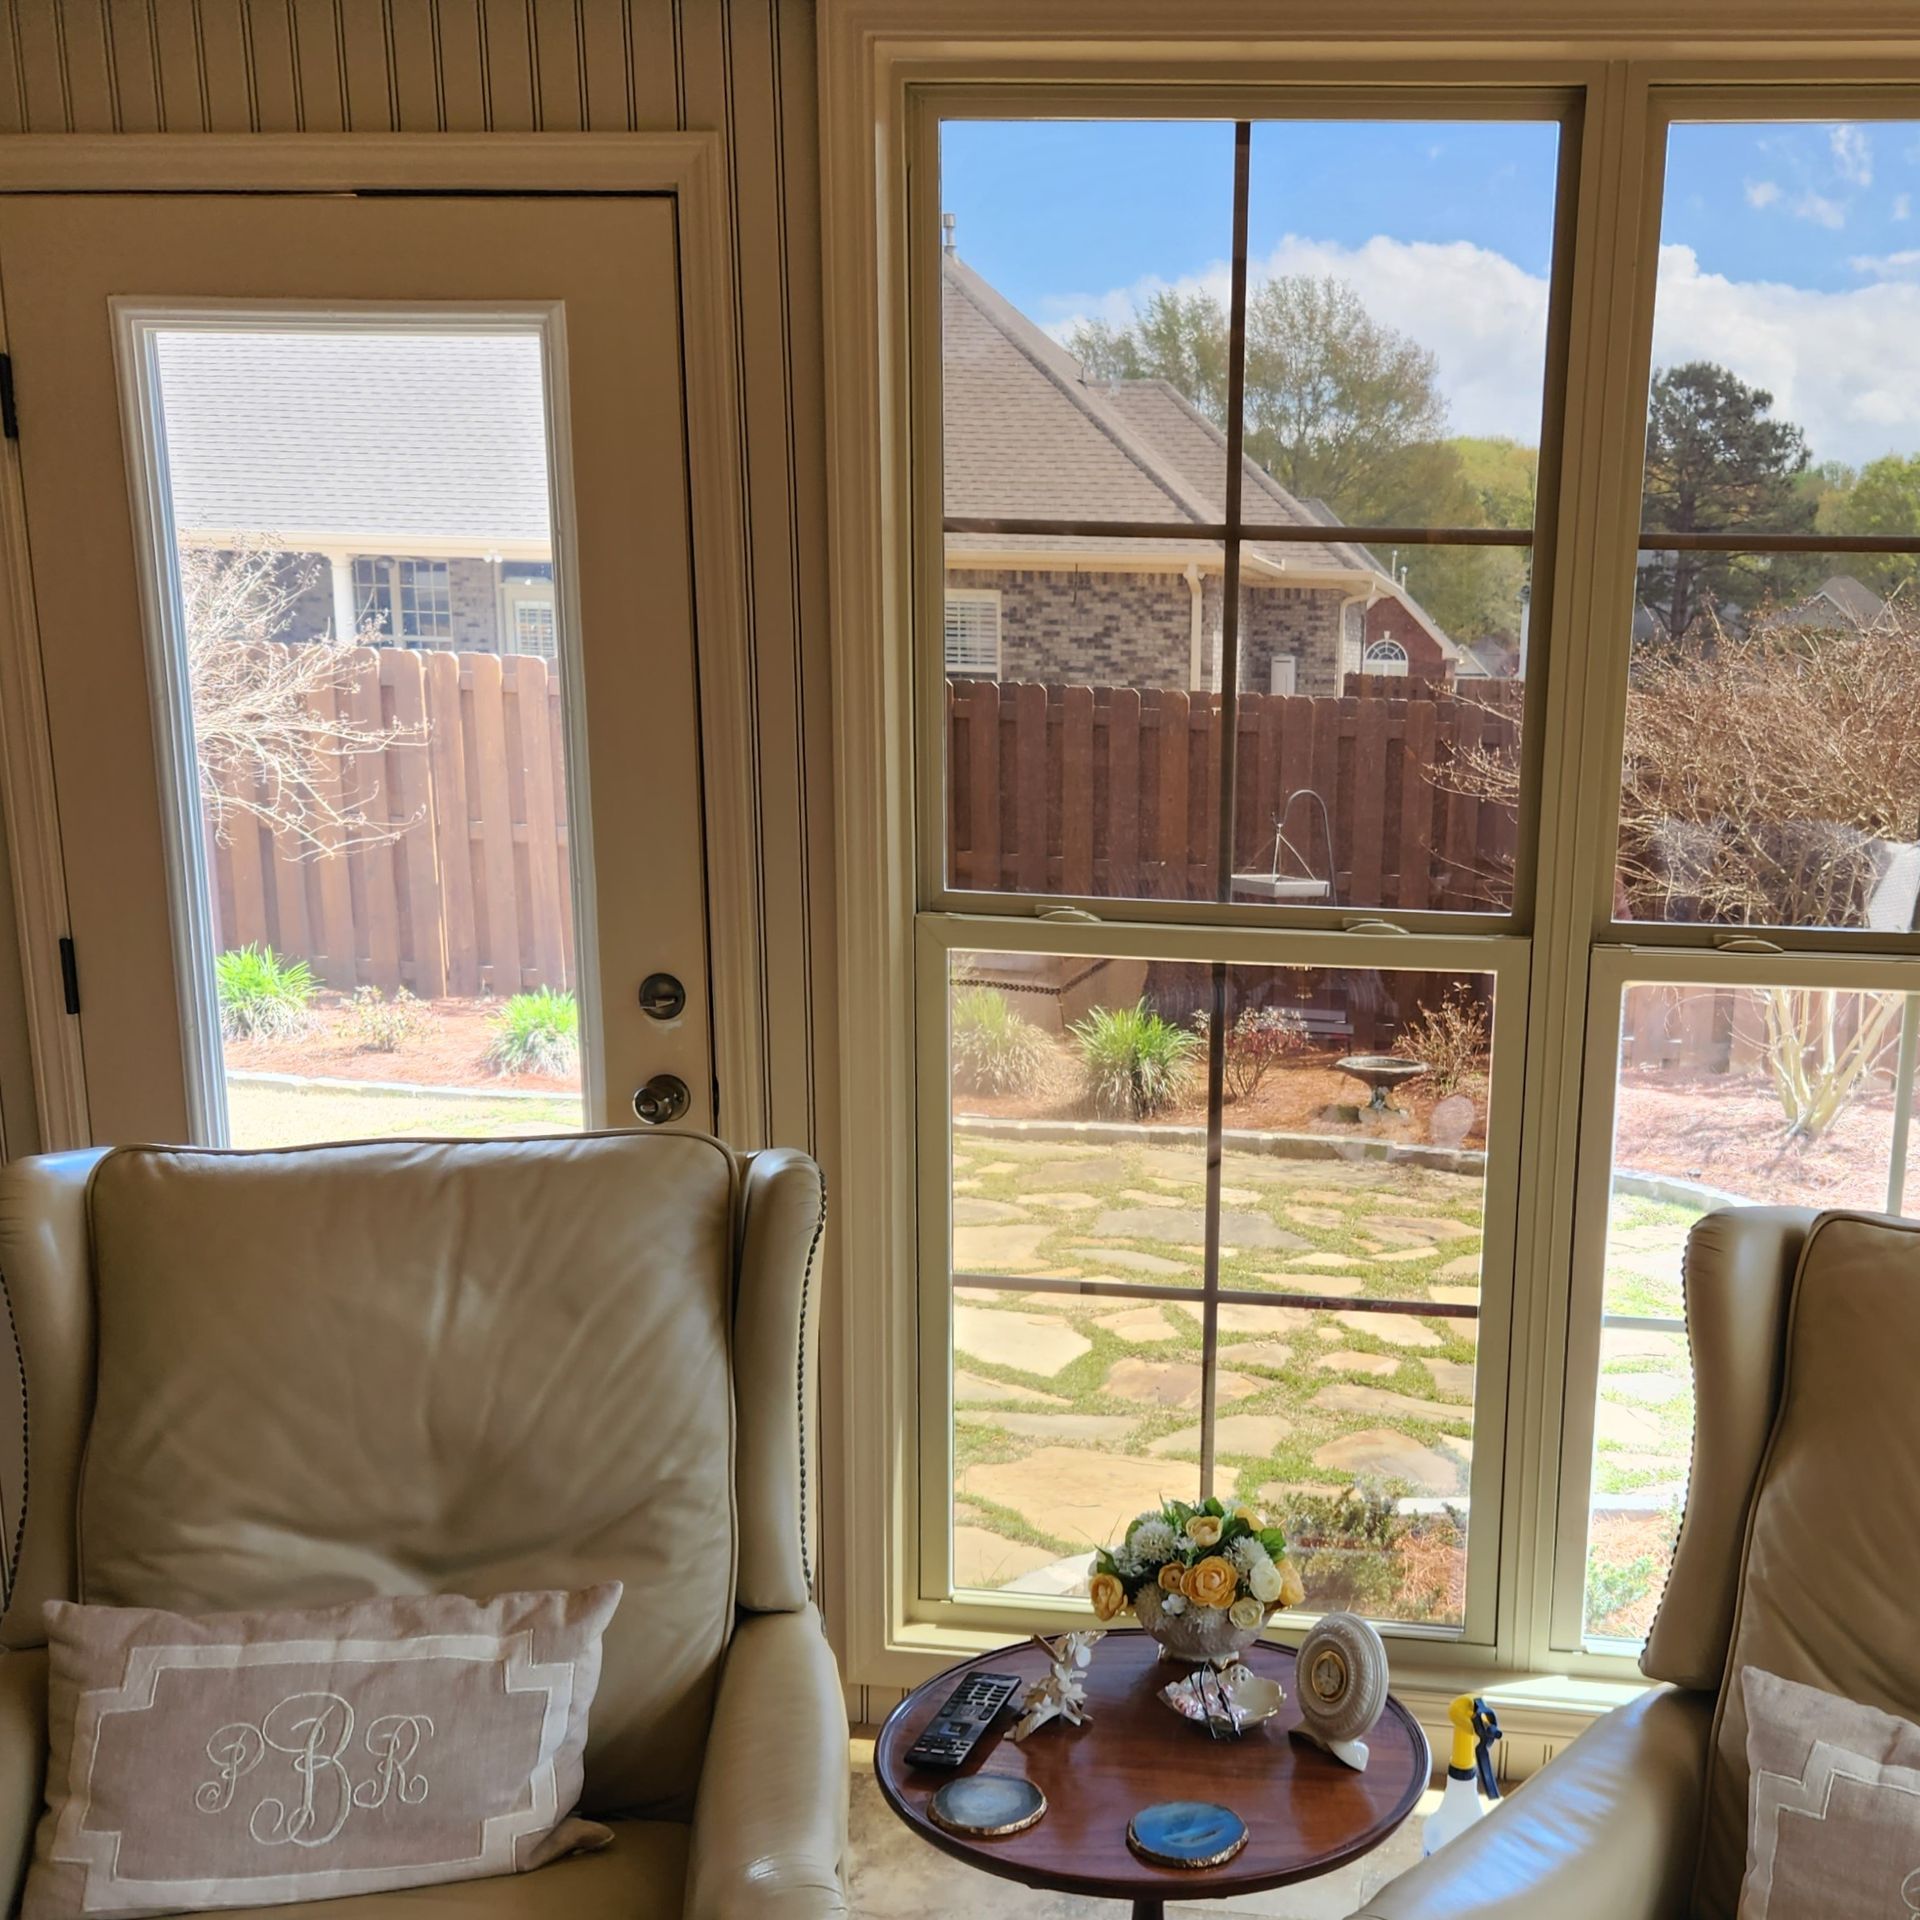 home window tinting - Contrasting Sun Glare seen before last window and glass door are treated with SPF Tint in Prattville AL